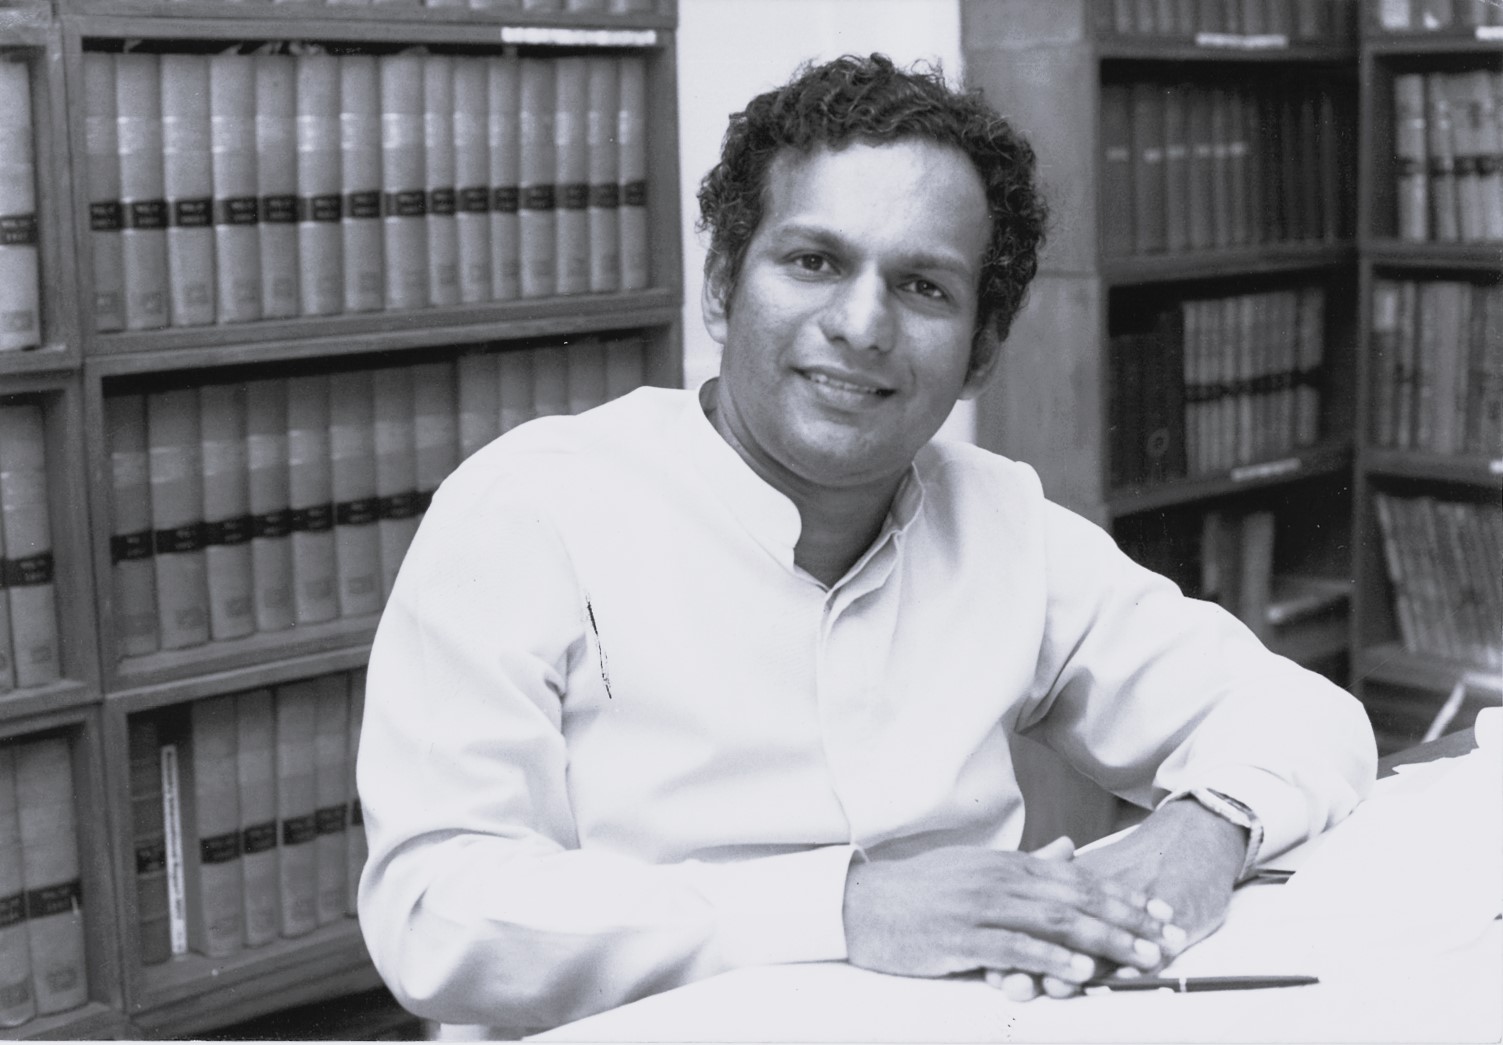 Neelan Tiruchelvam sitting at table in front of book shelves and smiling into camera.